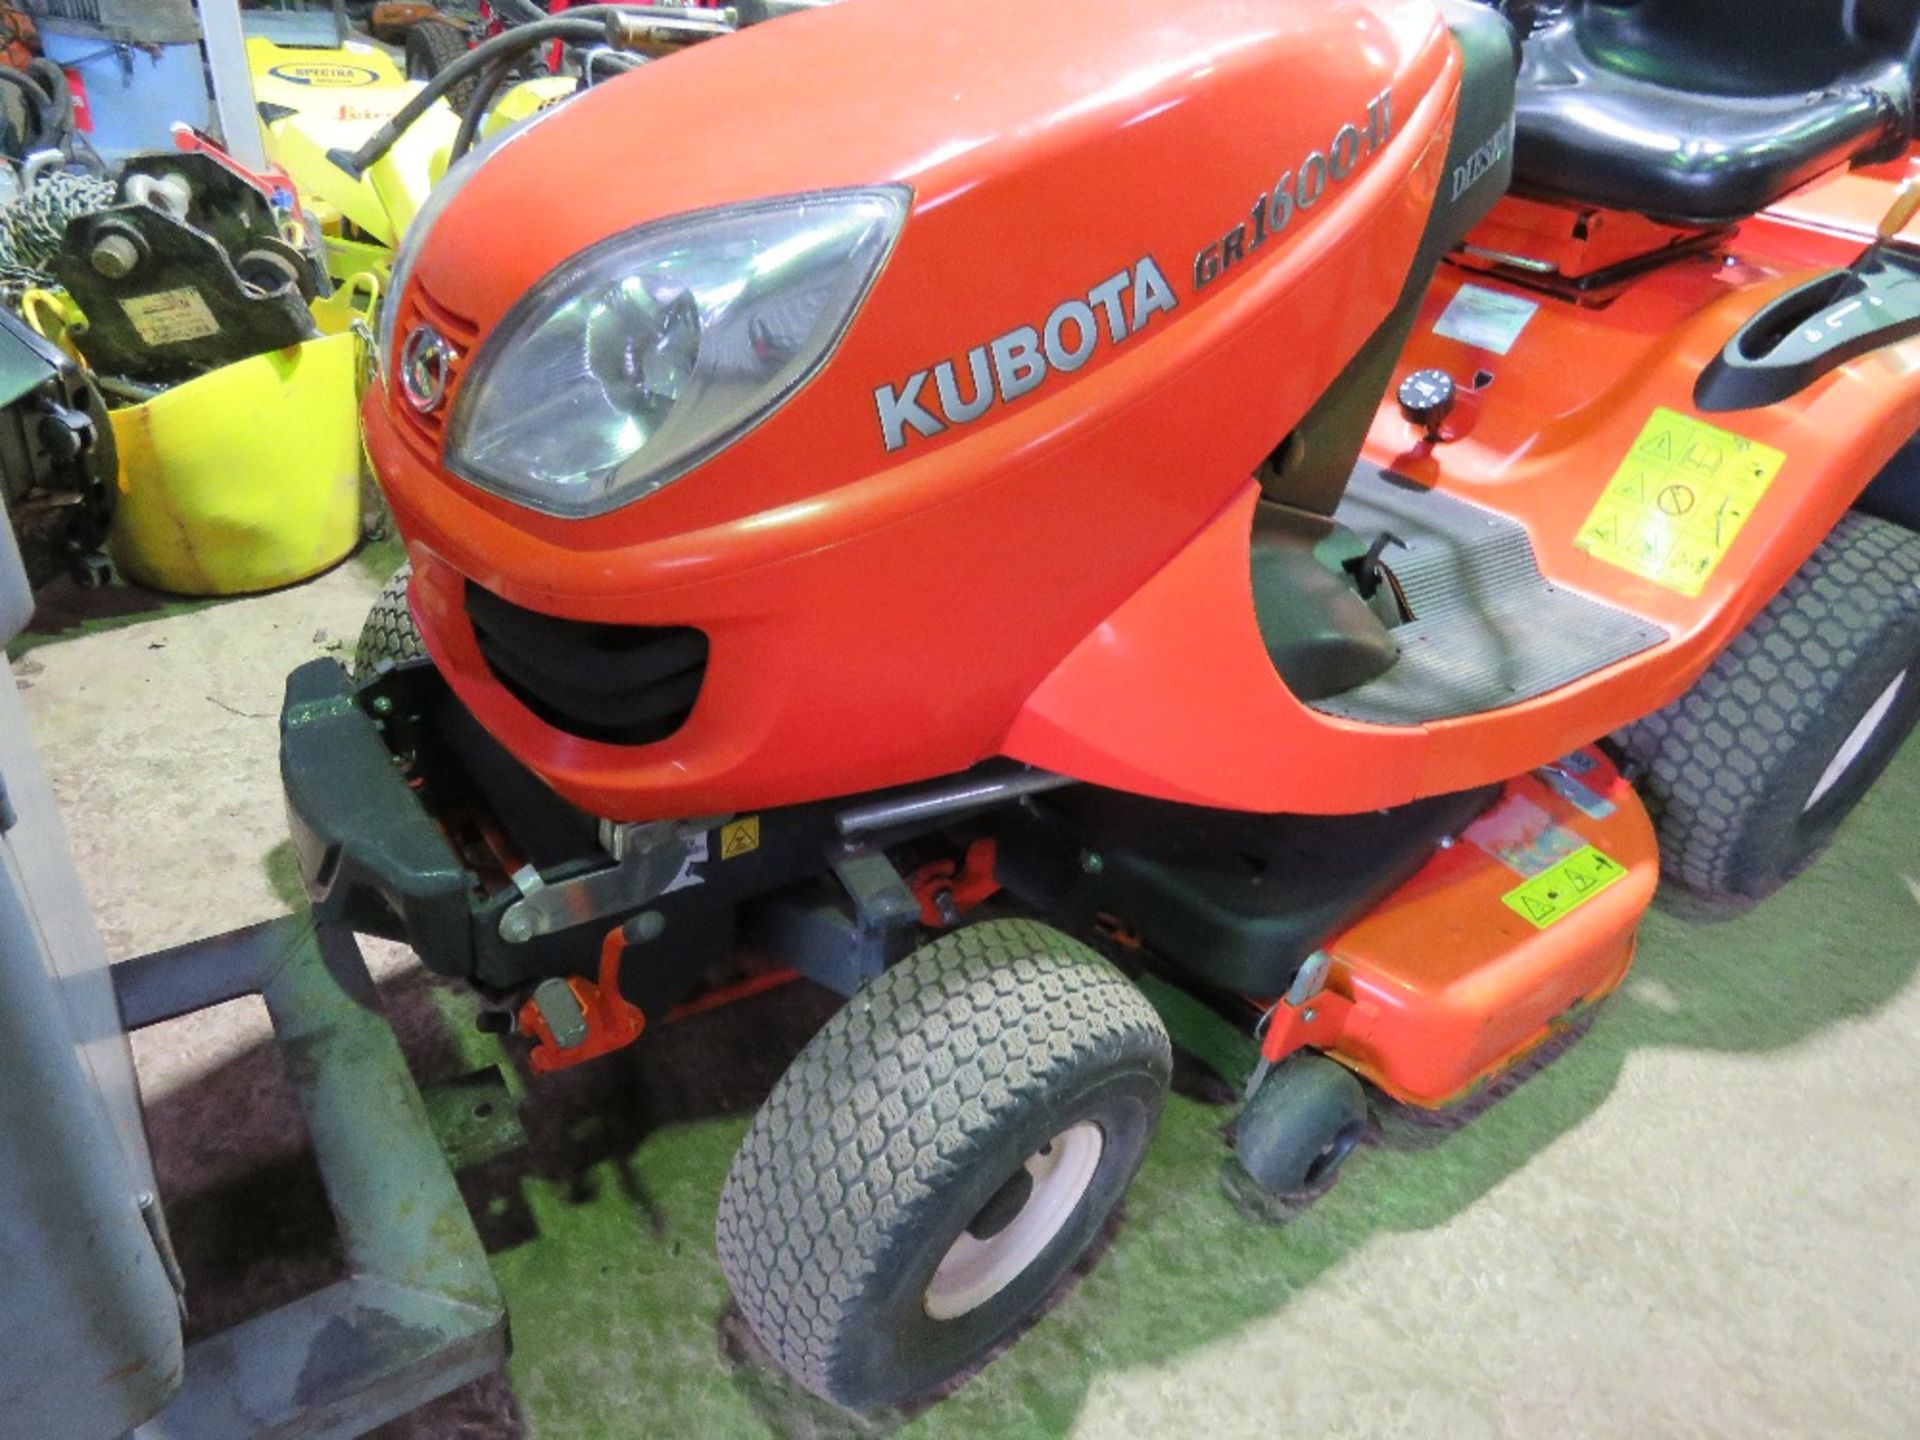 KUBOTA GR1600-II DIESEL RIDE ON MOWER WITH REAR COLLECTOR PLUS DISCHARGE CHUTE. SN:30142. WHEN TESTE - Image 3 of 14